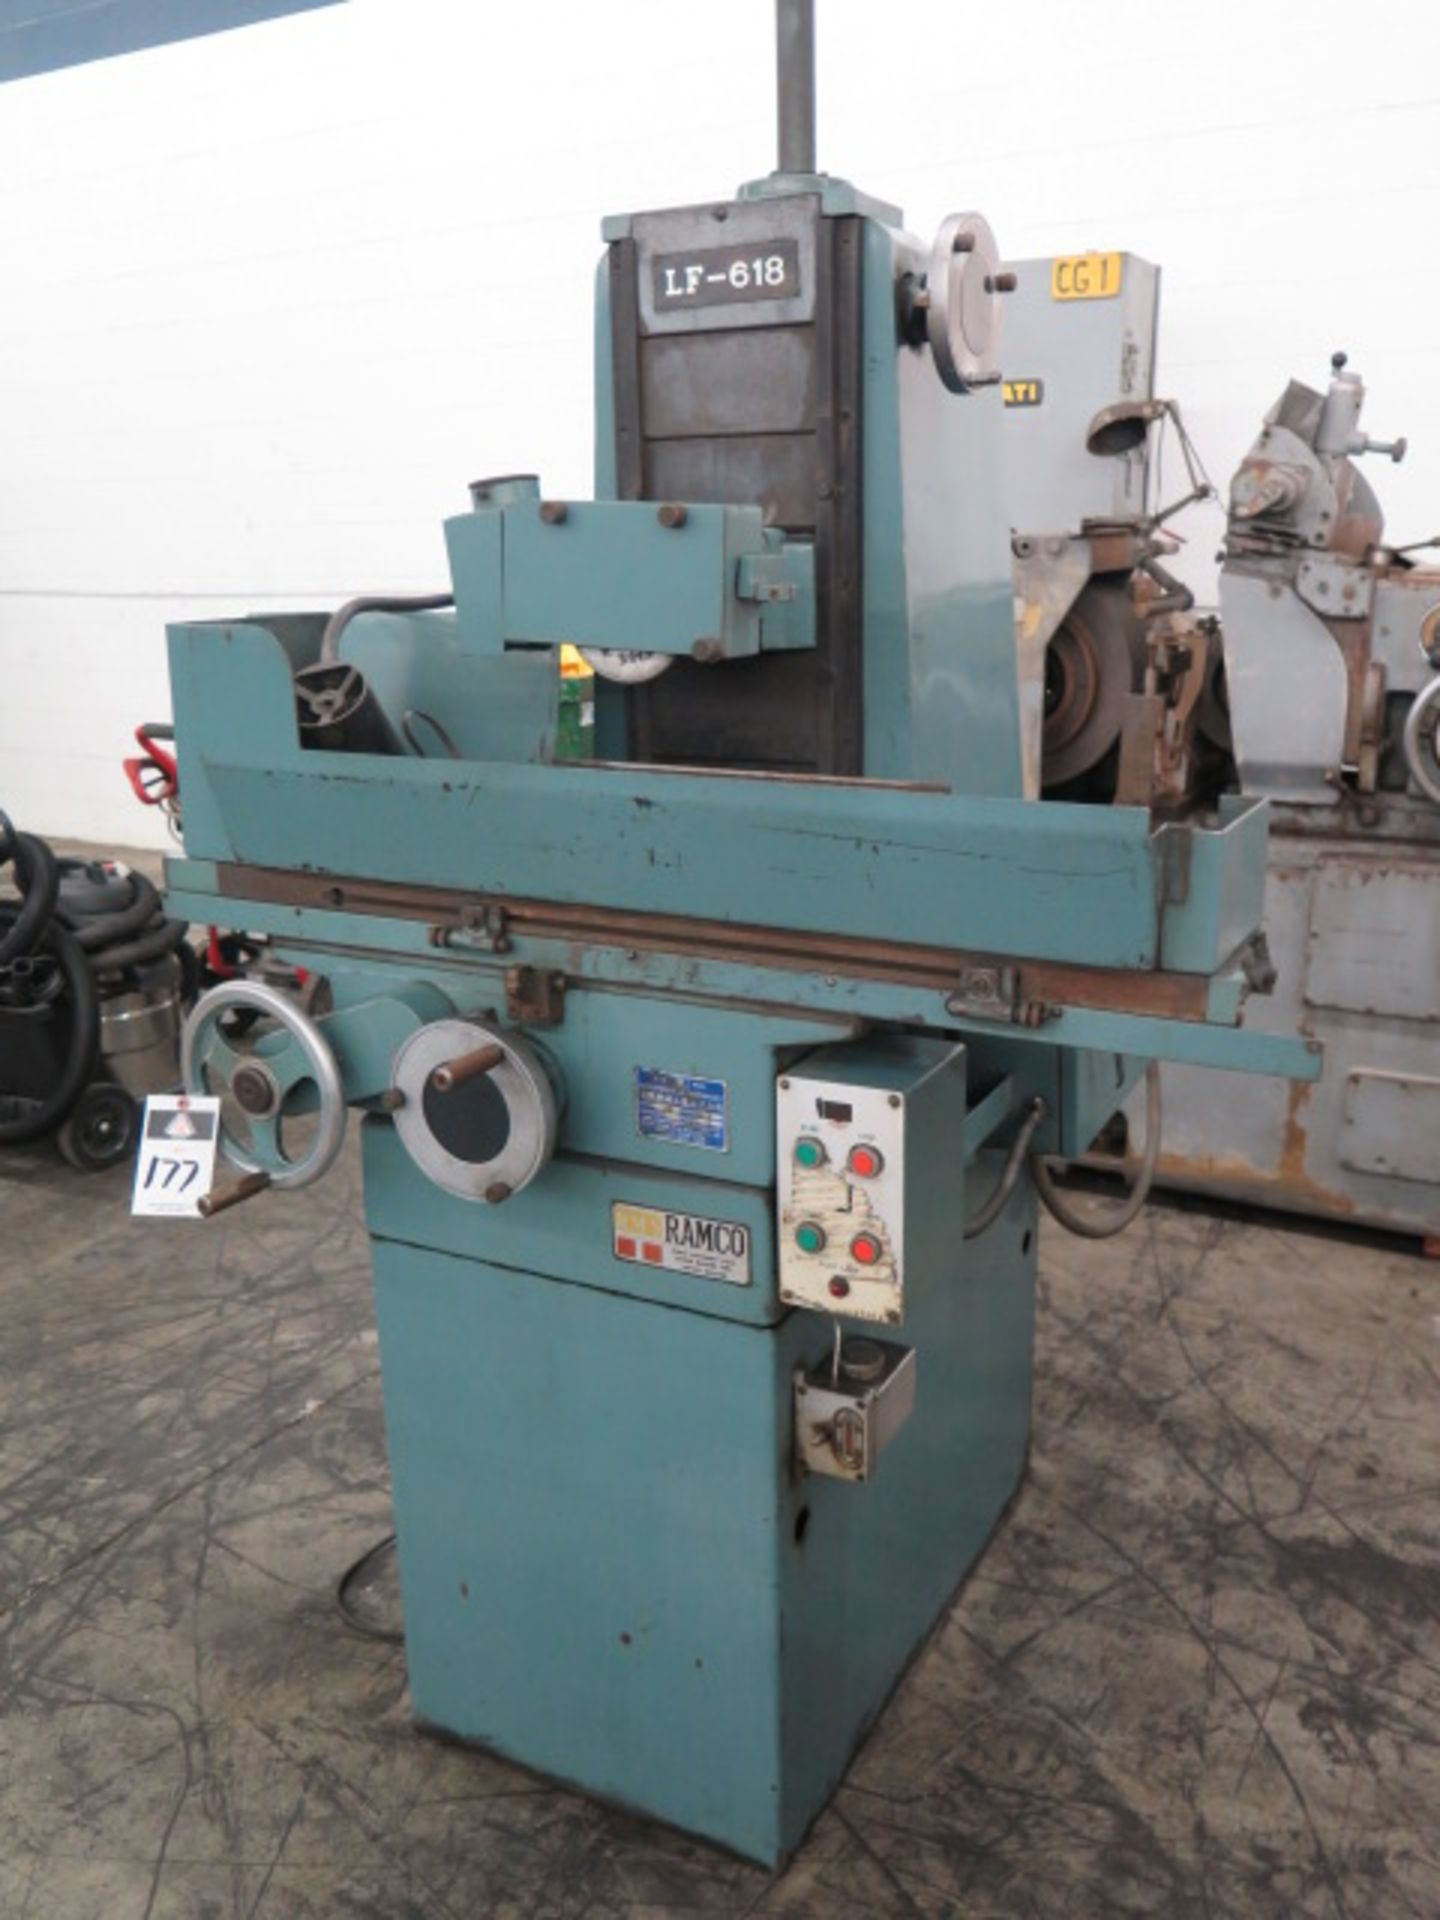 Ramco LF-618 Surface Grinder w/ Magnetic Chuck - Image 2 of 6